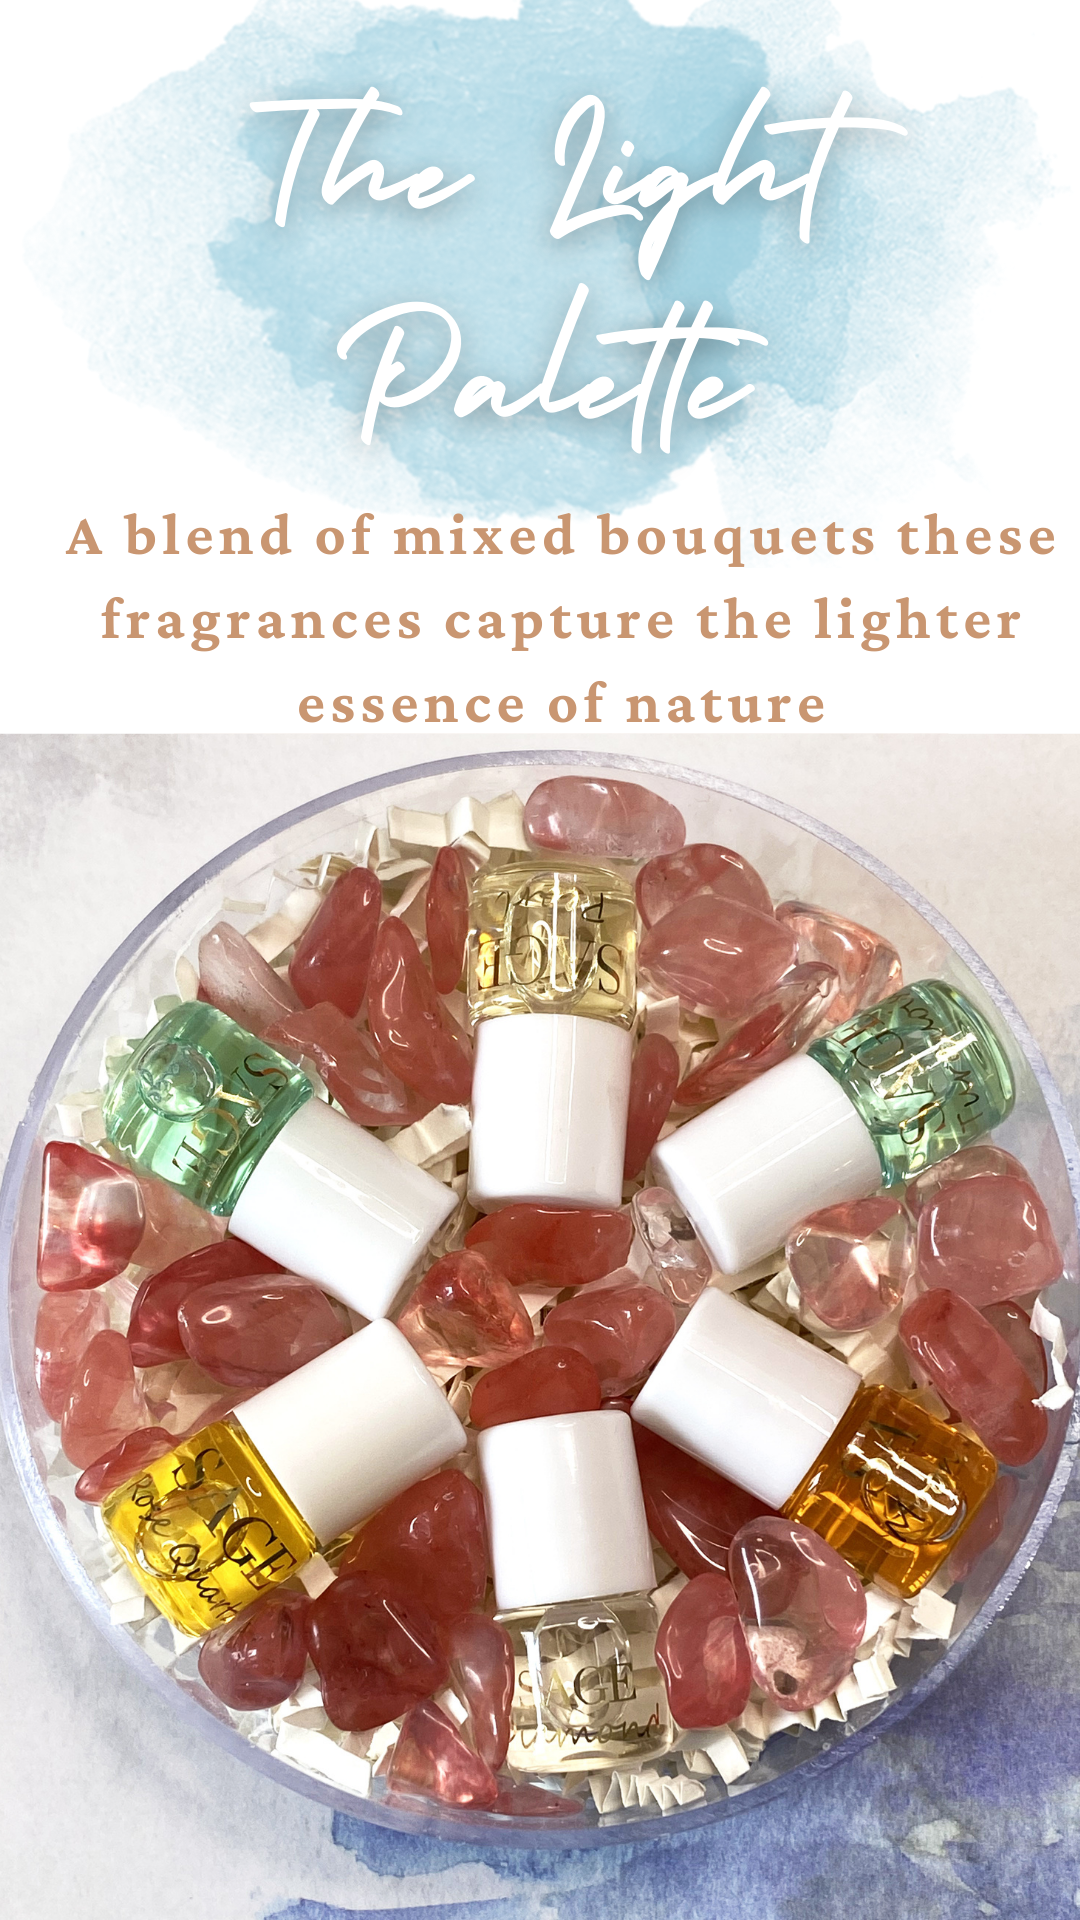 Words the light palette,a blend of mixed bouquets these fragrances capture the lighter essence of nature on an imaage of Pearl  Sage Diamond Moonstone Rose Quartz and Turquoise mini rollie glass bottle with white cap on pink gemstones in plastic container.